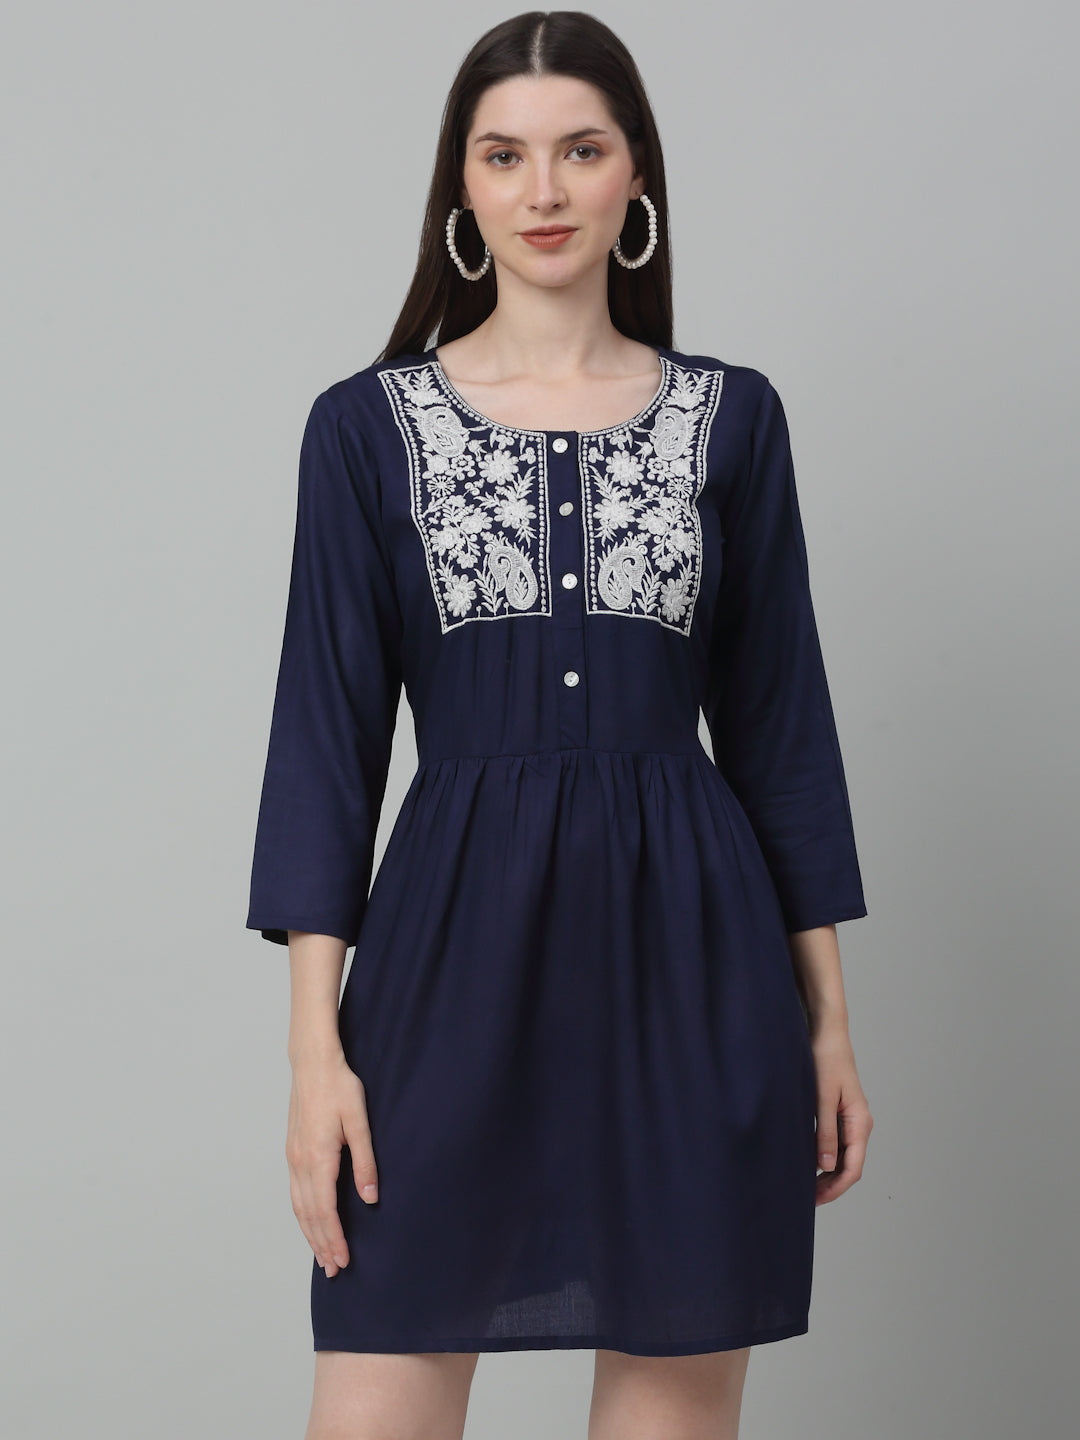 Women's Navy Embroidered A-line Dress